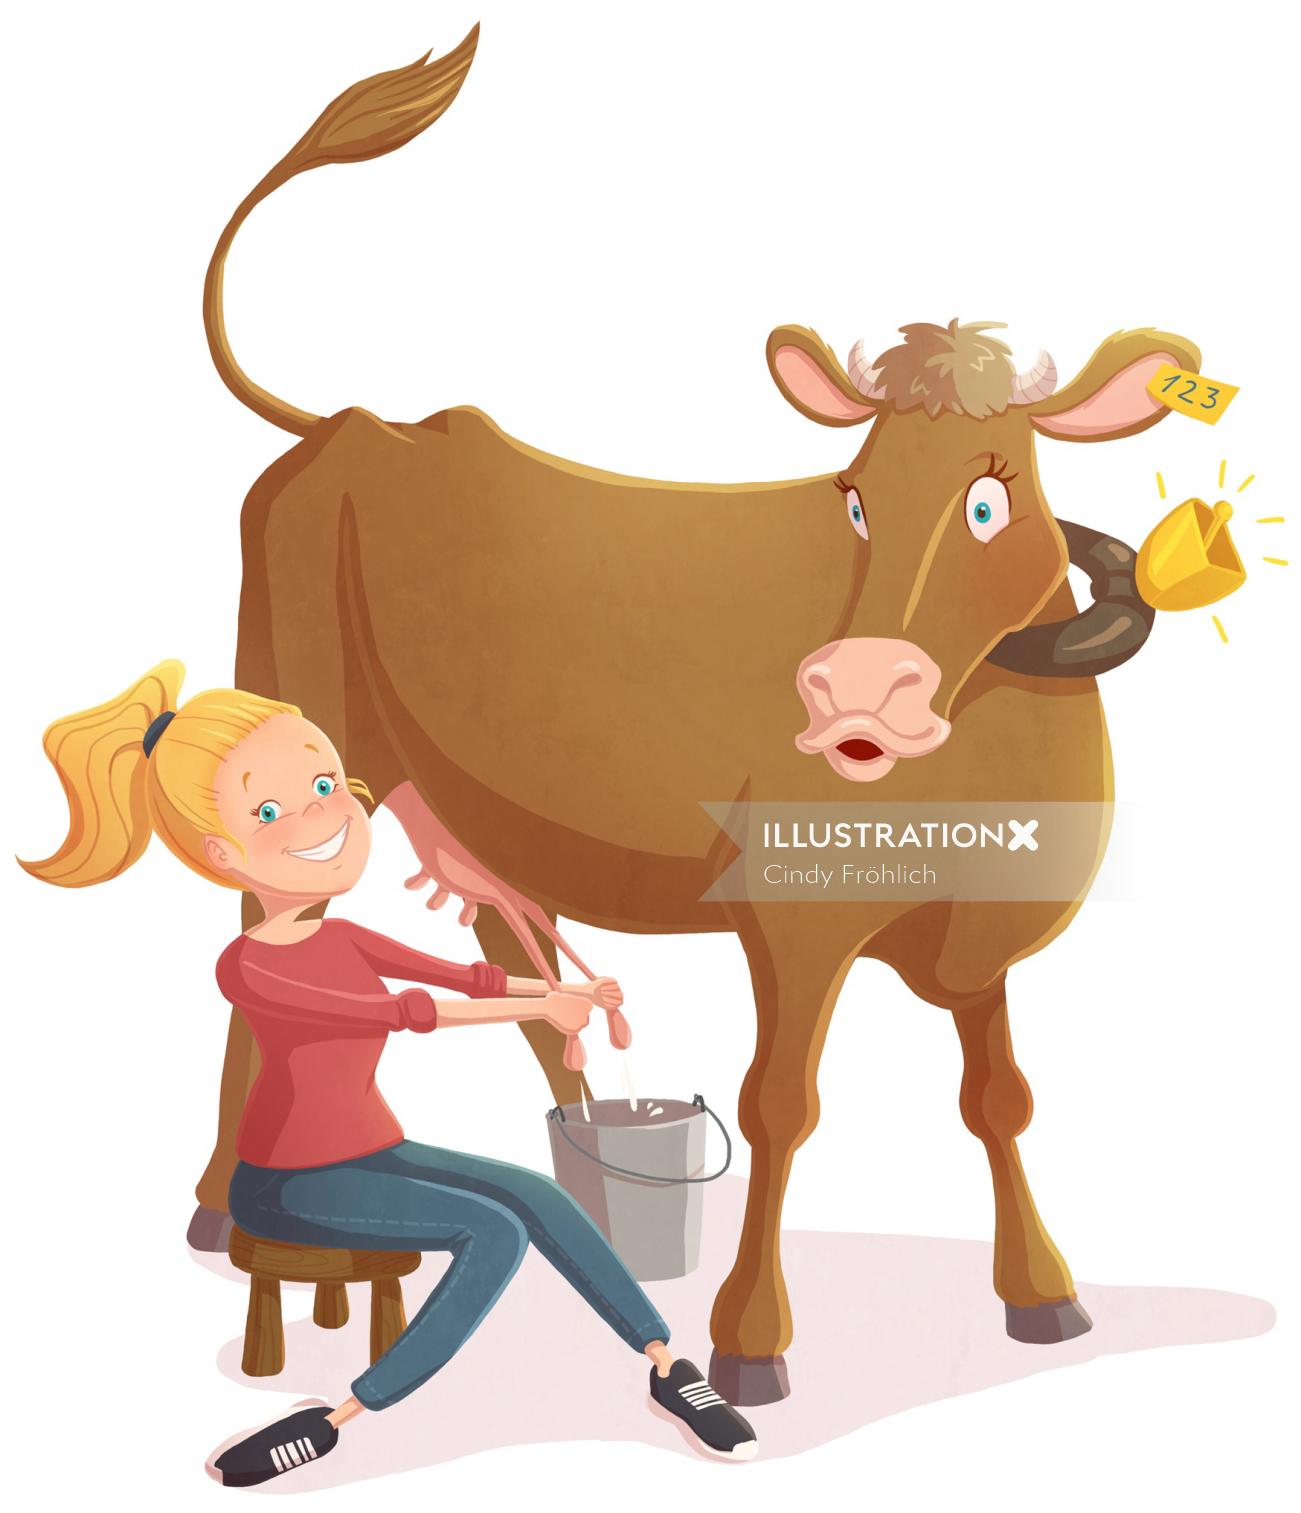 children illustration girl with cow
